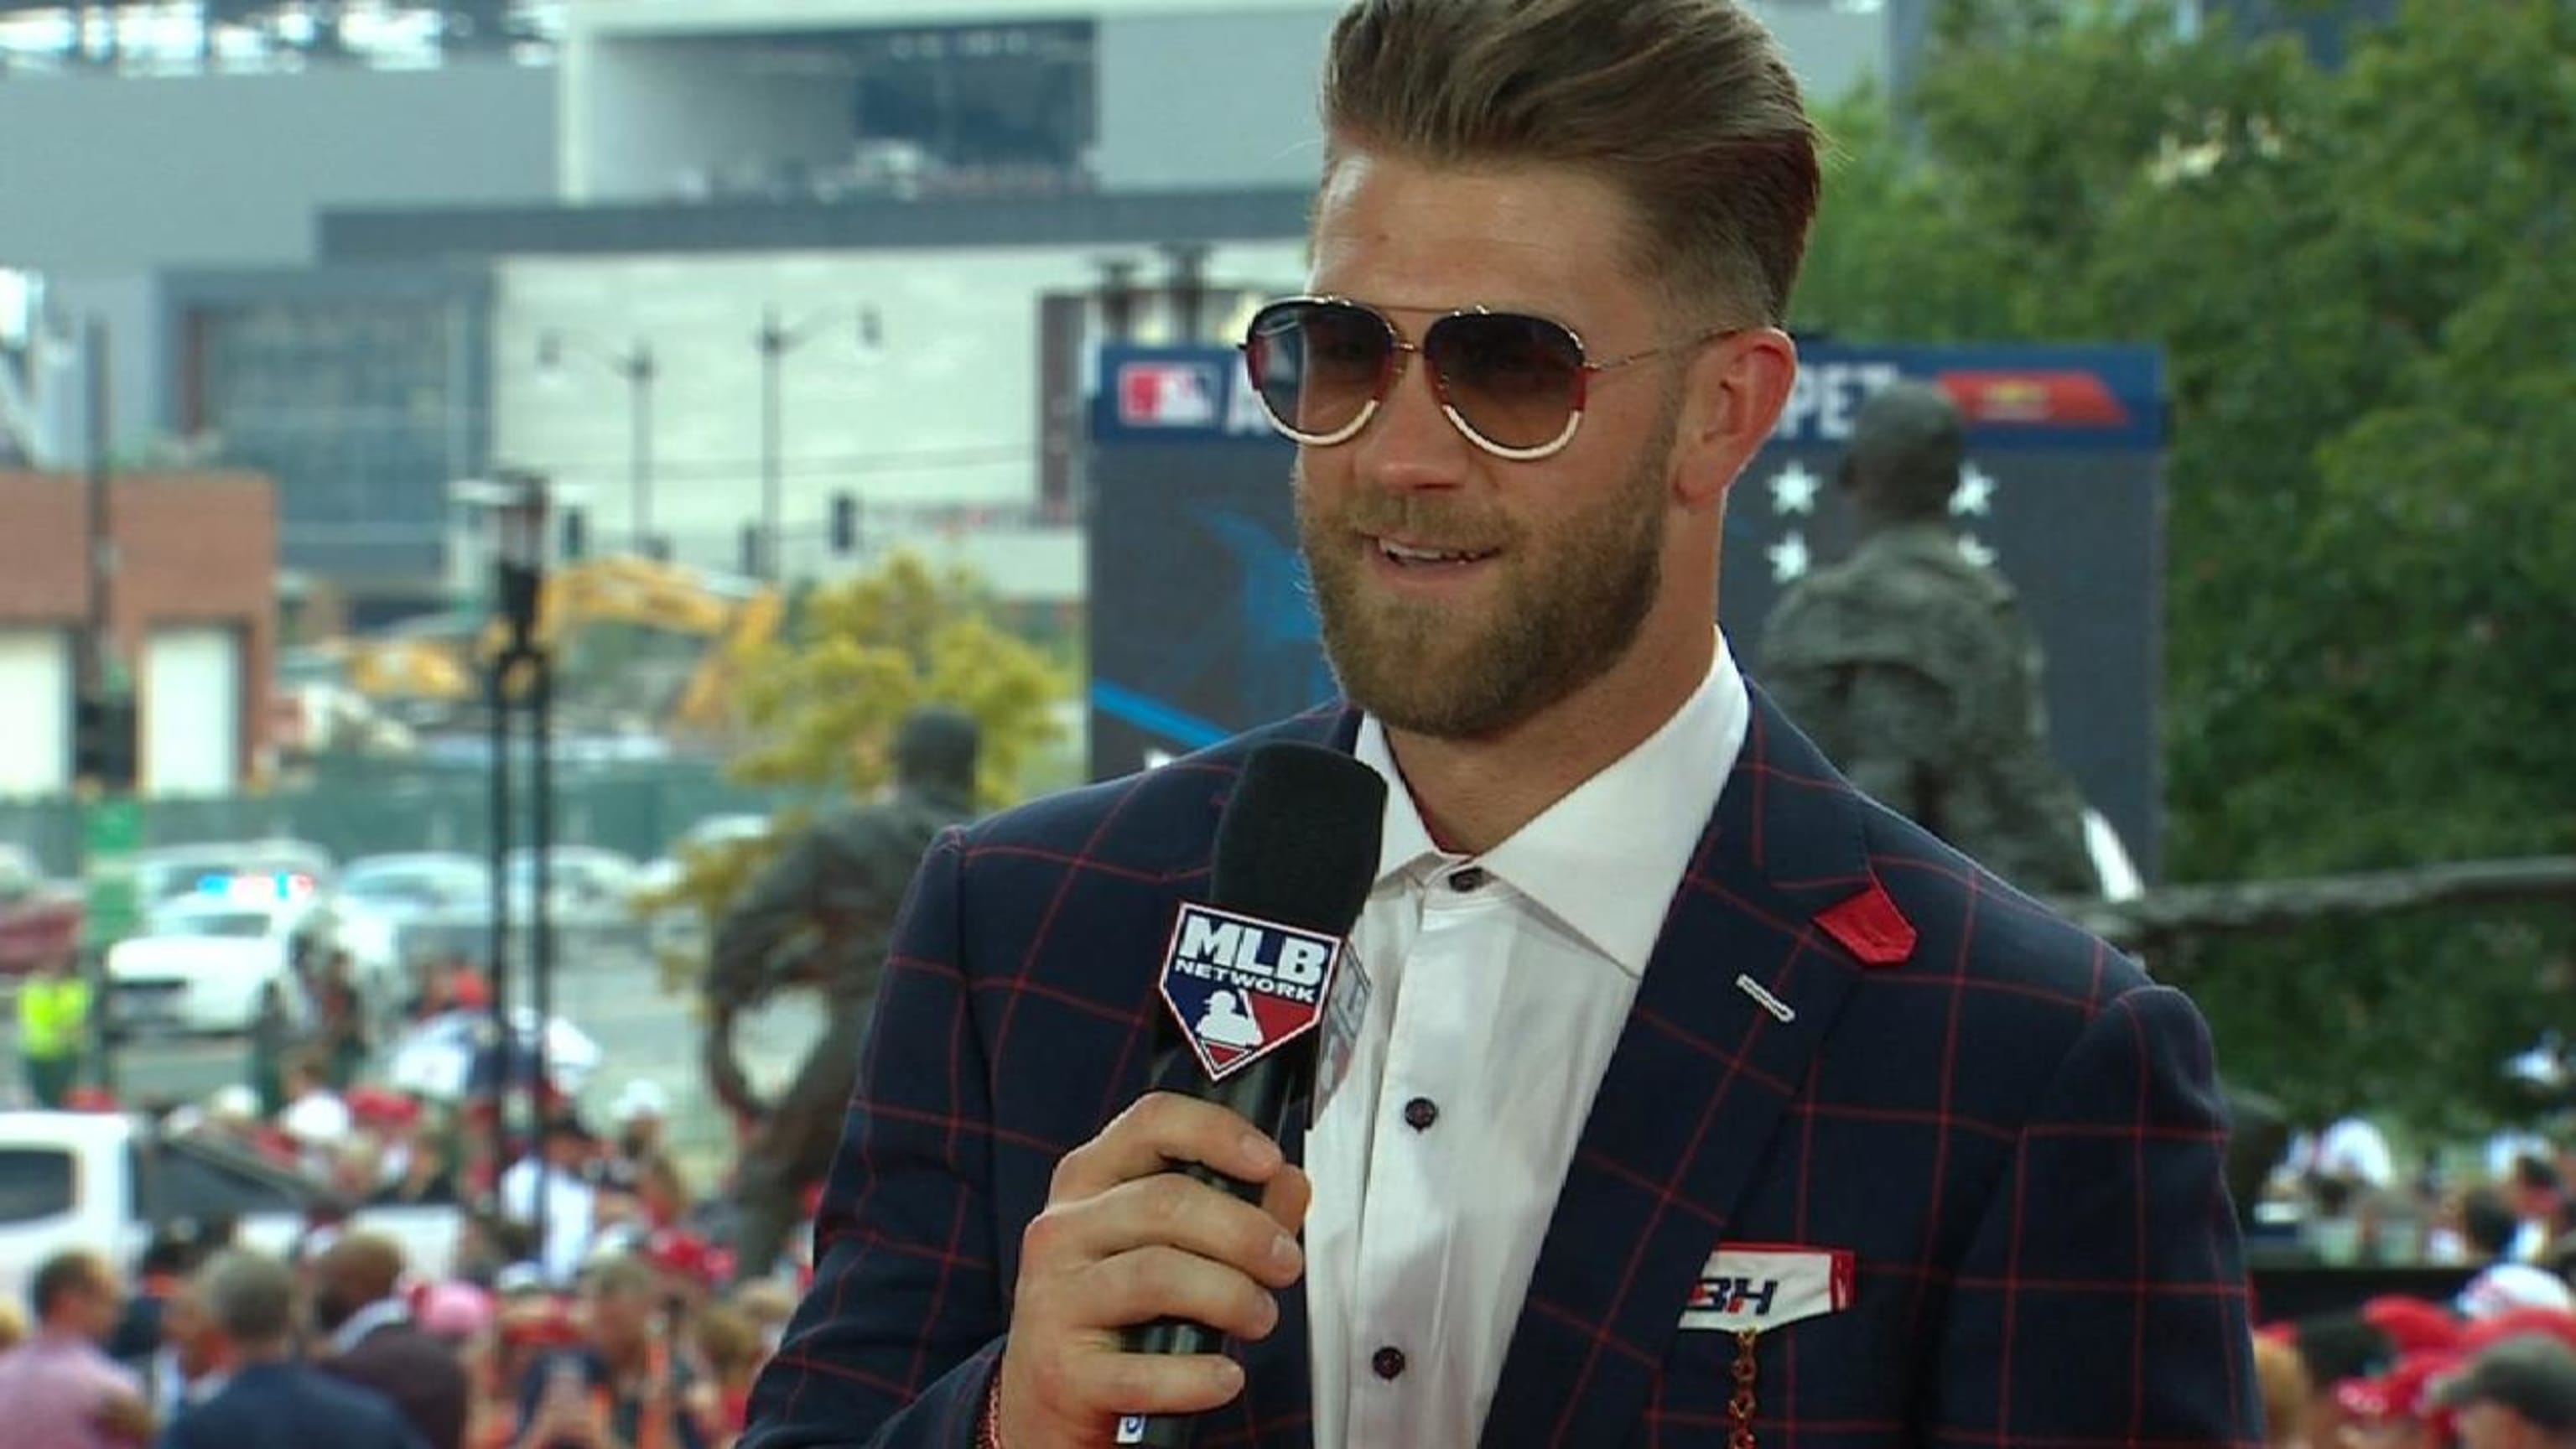 MLB Life on X: Bryce Harper showed up to the game today wearing a